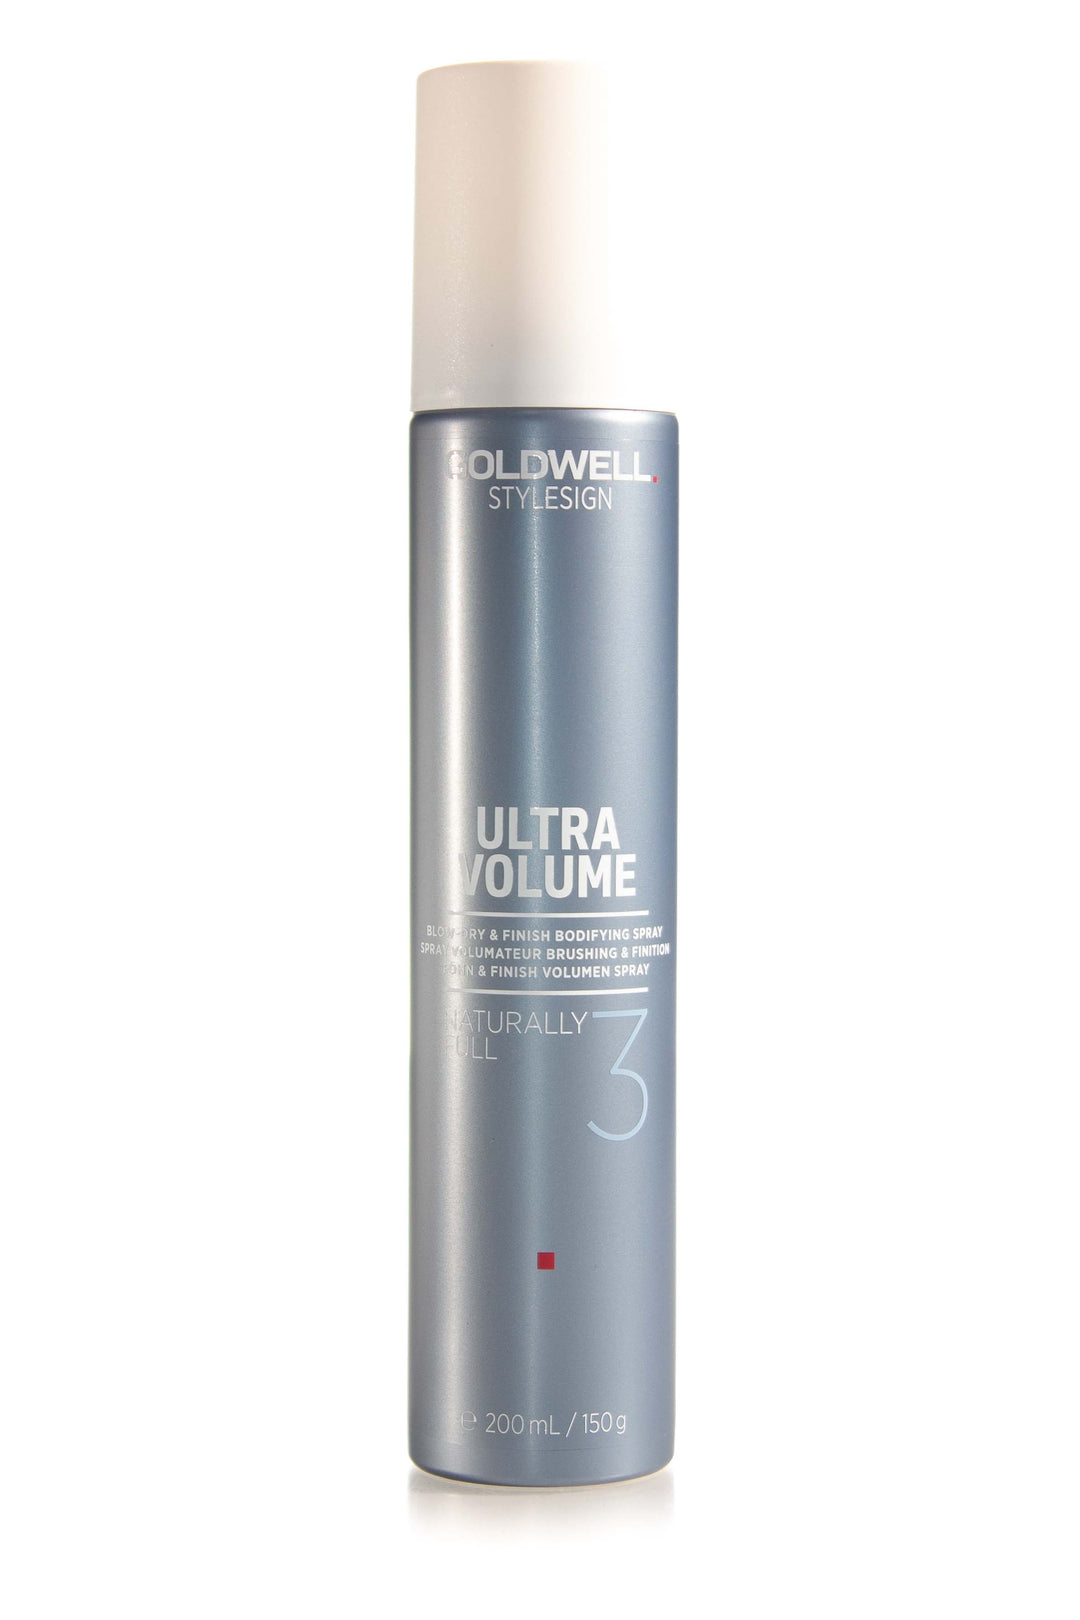 Product Image: Goldwell Ultra Volume Naturally Full - 200ml